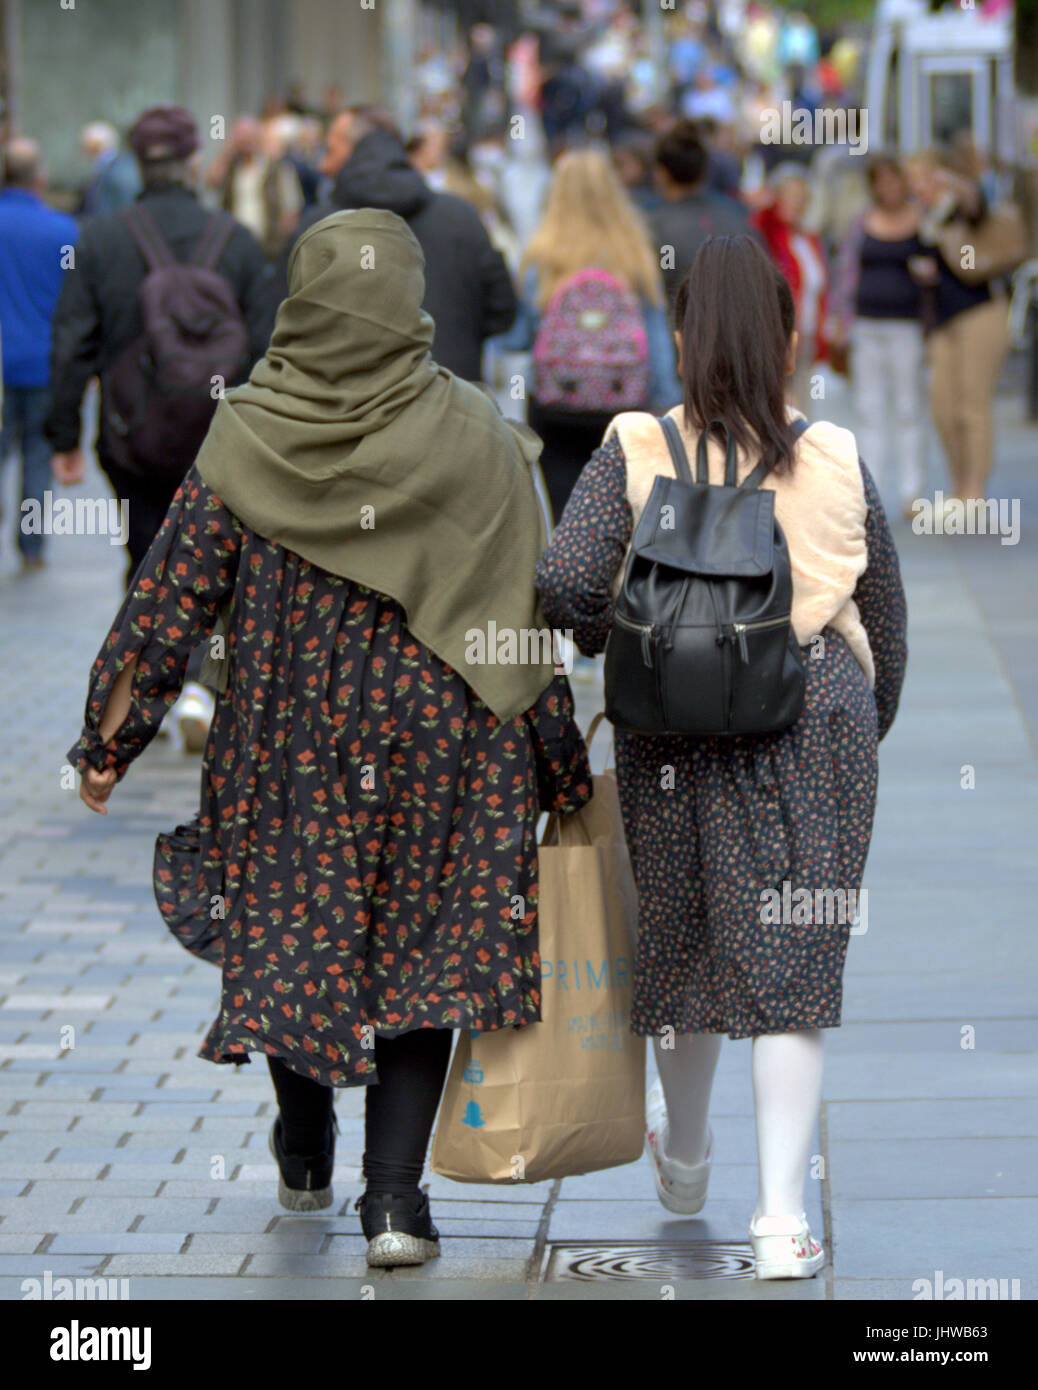 Asian family refugee young woman girl student pupil dressed Hijab scarf on street in the UK everyday scene walking on street Stock Photo